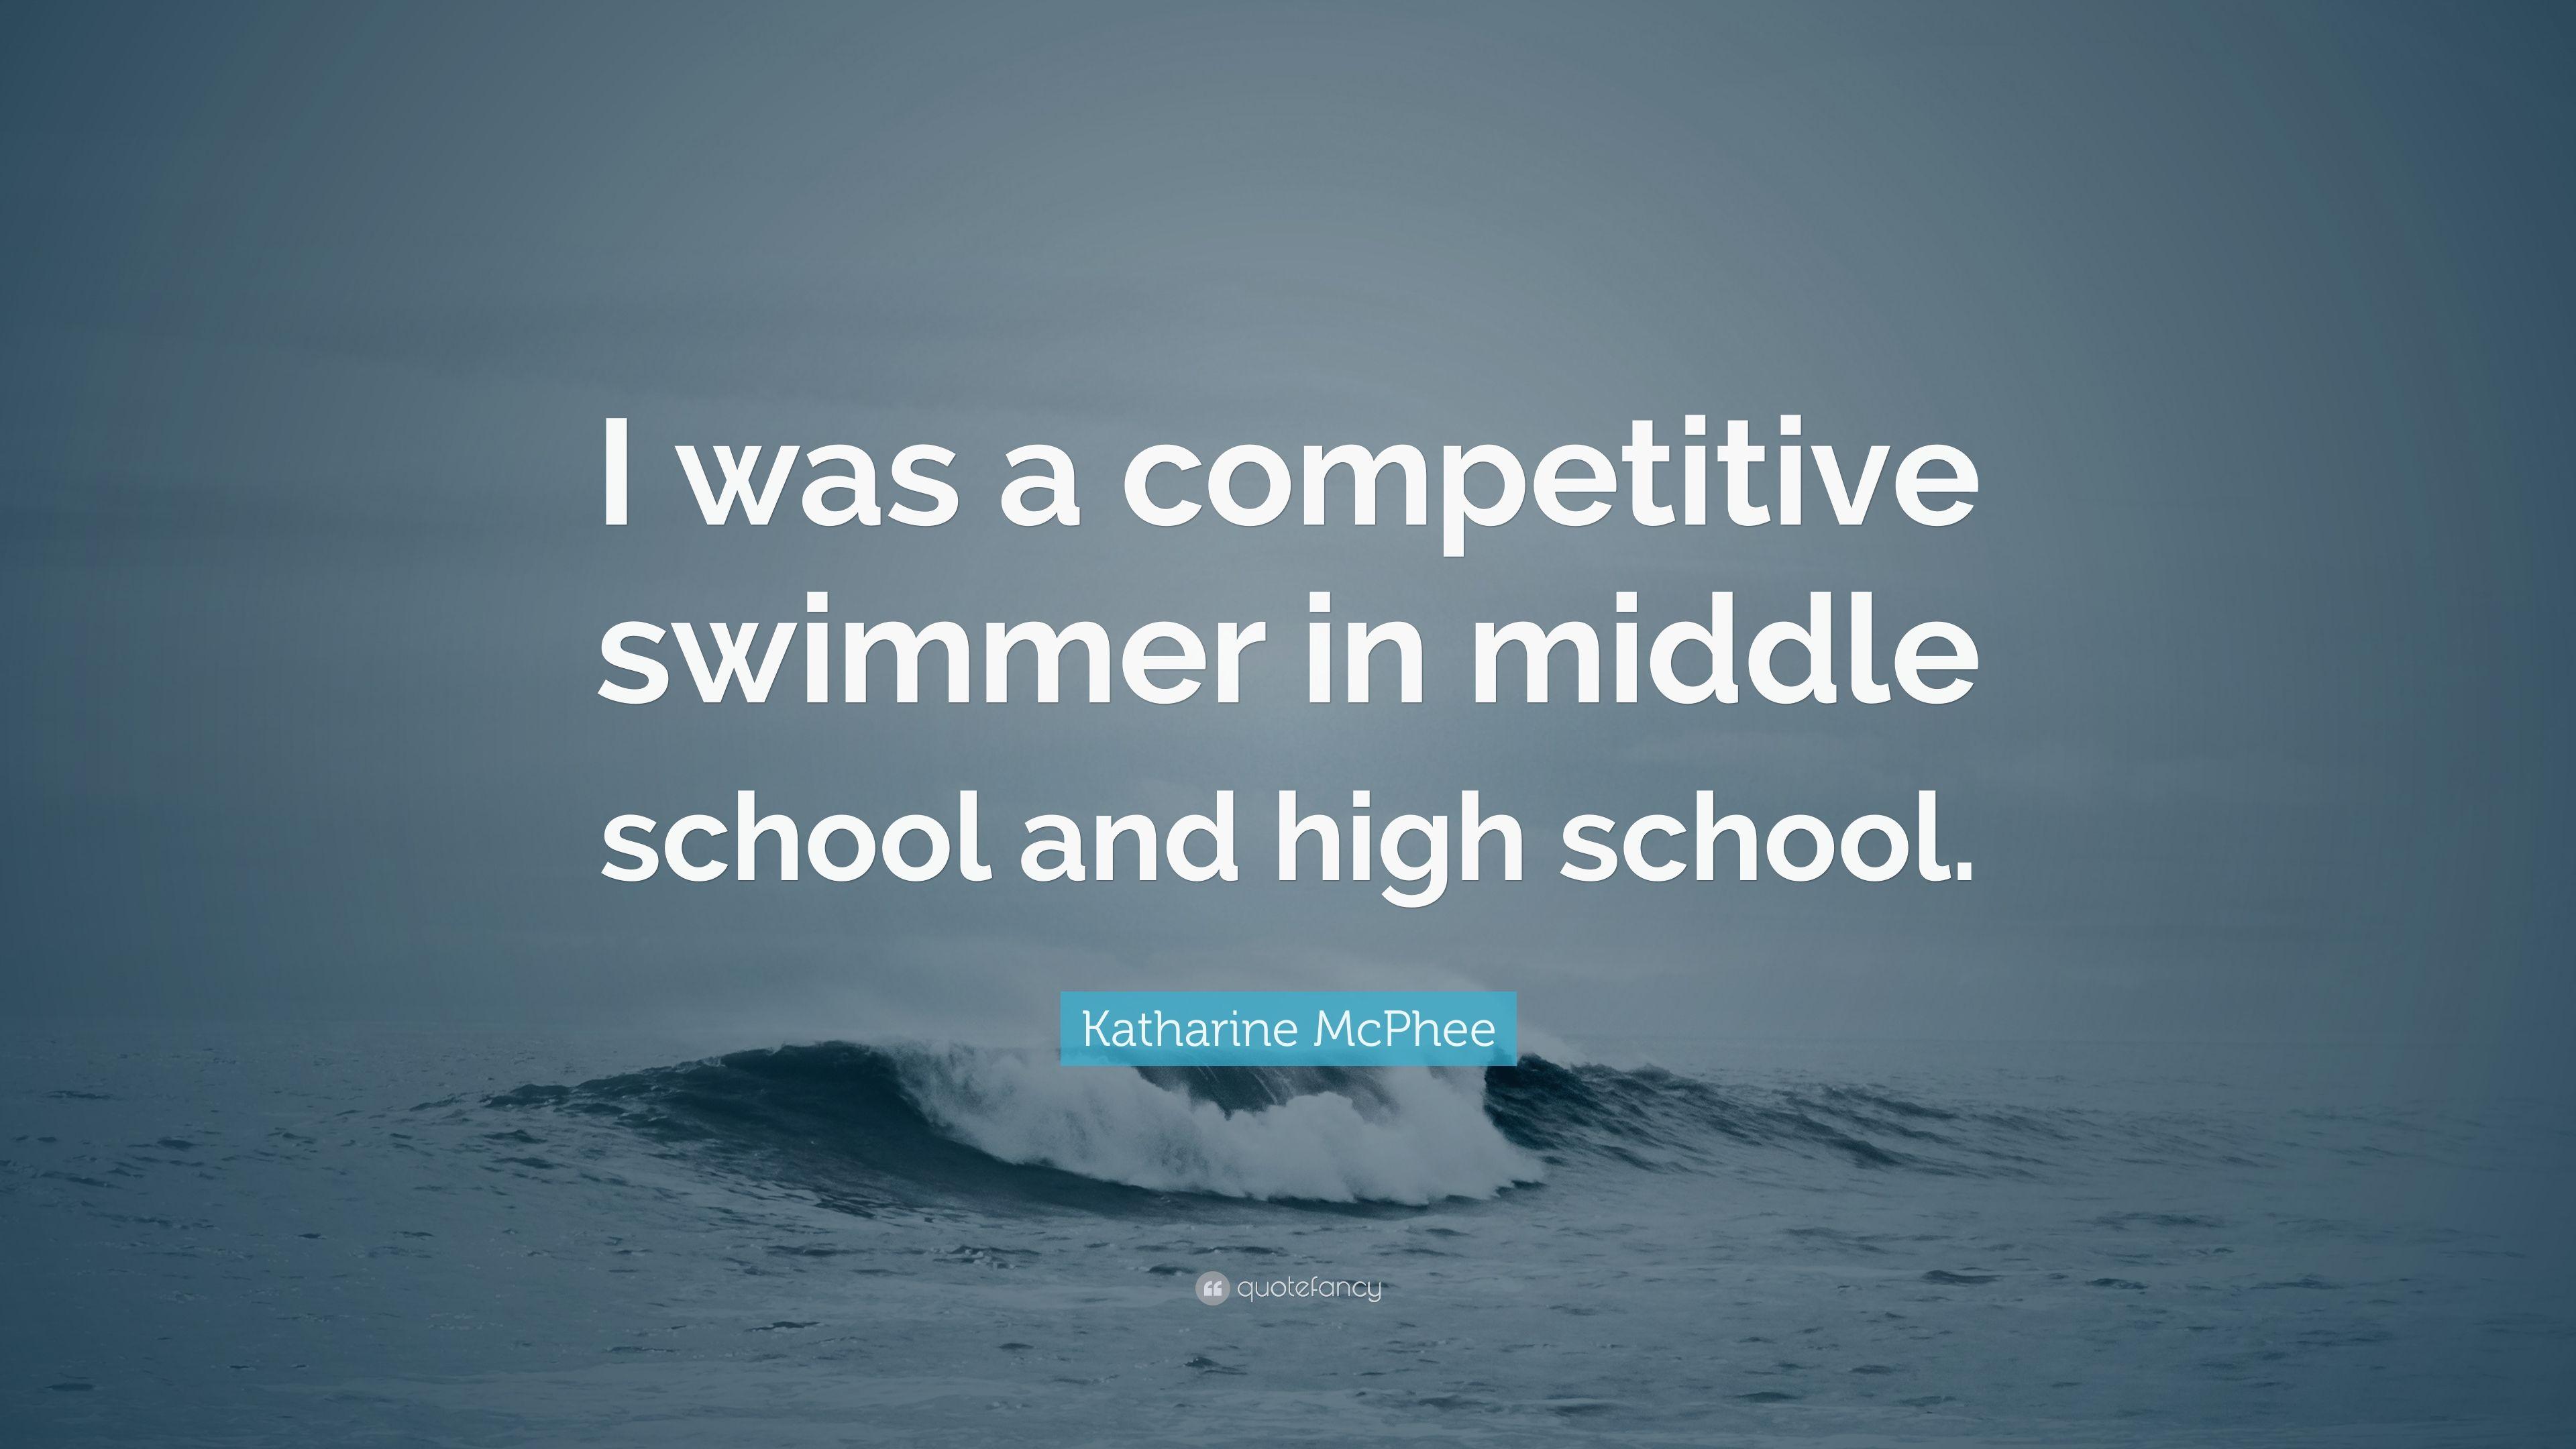 Katharine McPhee Quote: “I was a competitive swimmer